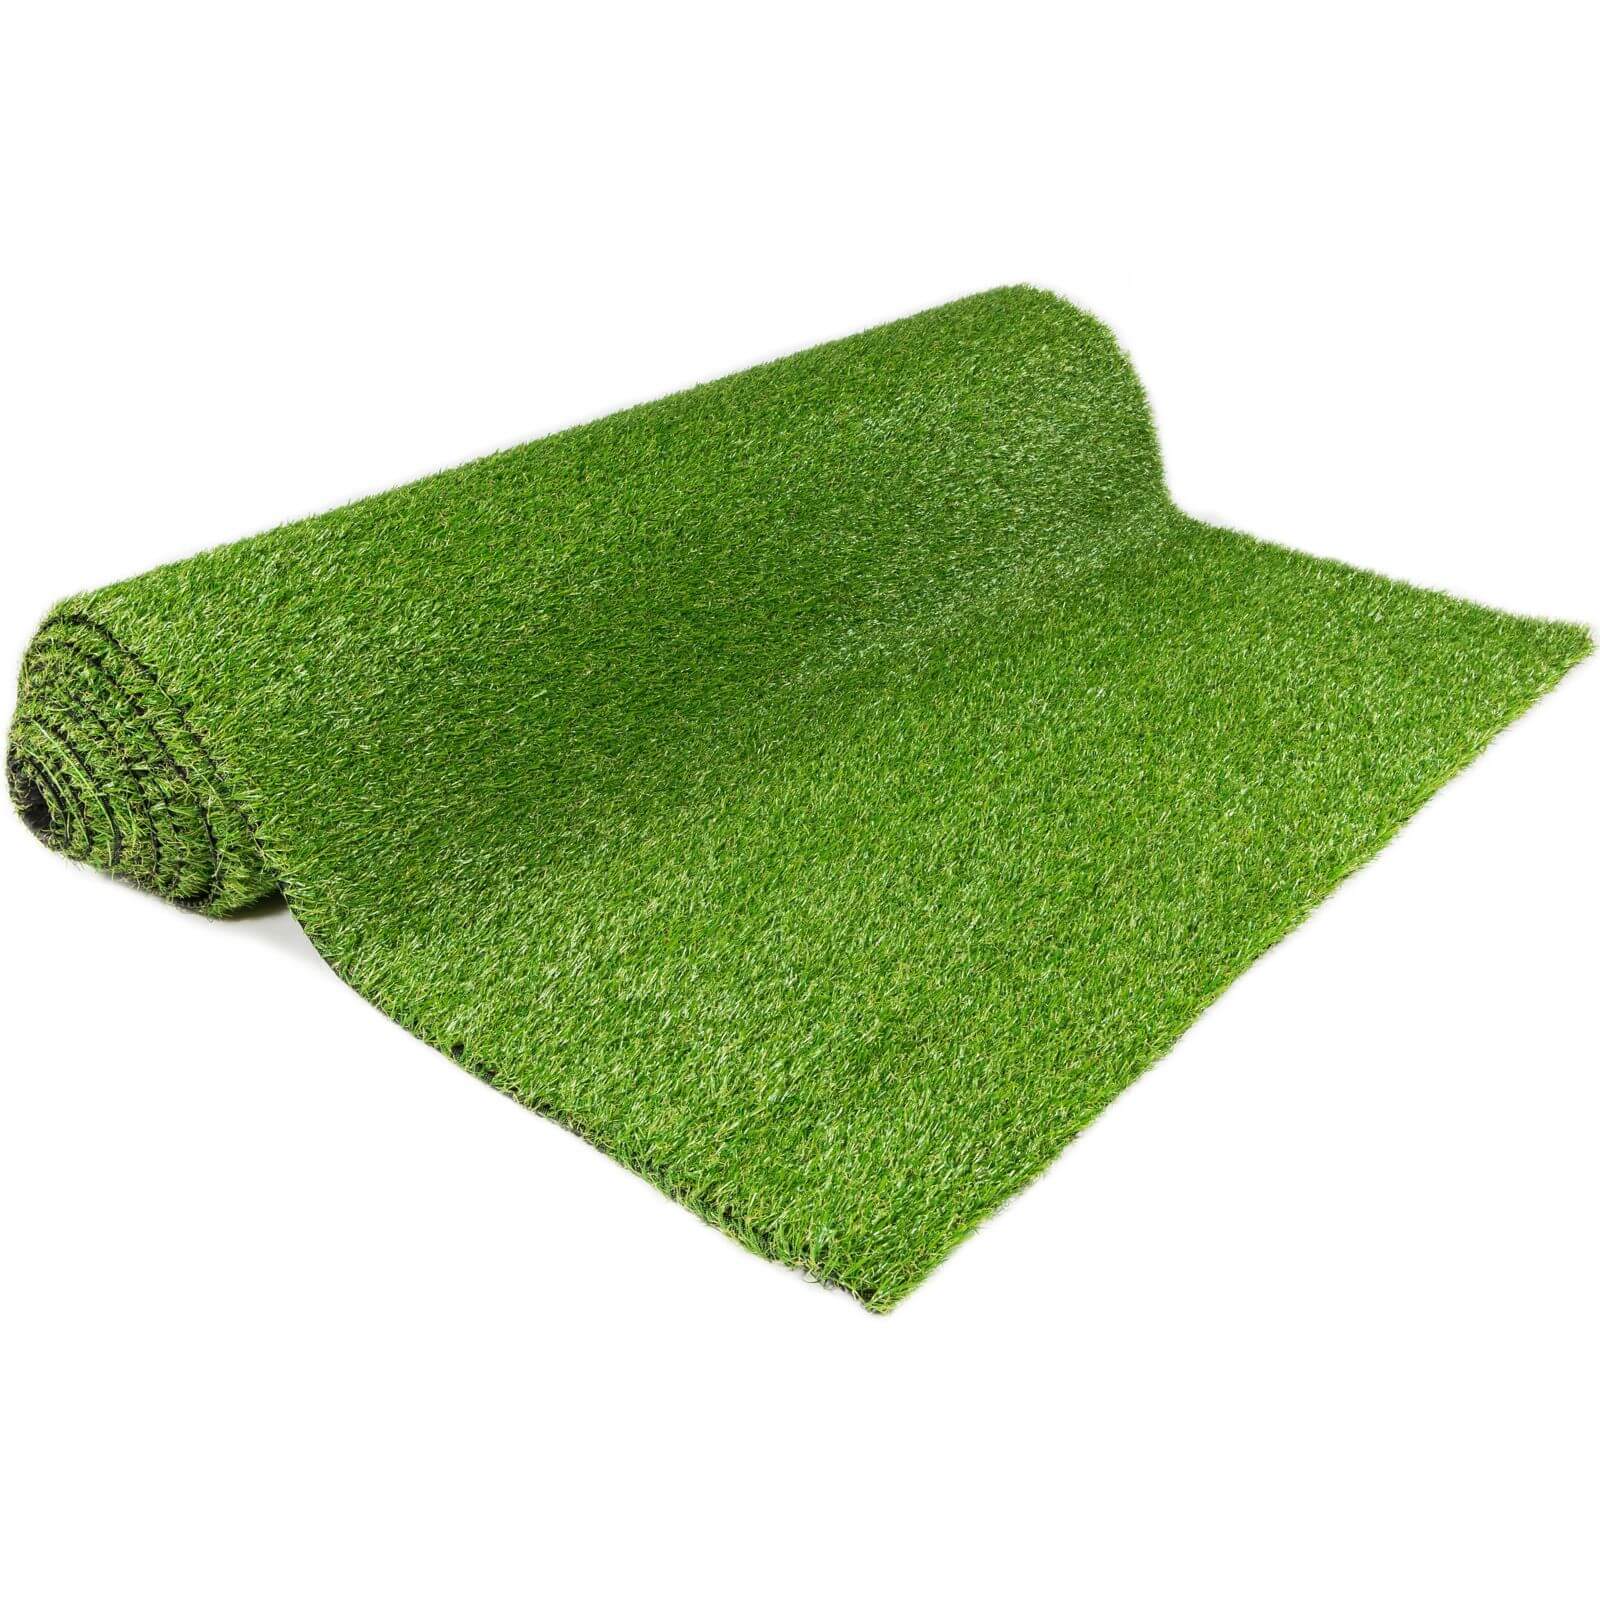 Greenstyle Economy Artificial Grass 3m X 1m Roll 15mm